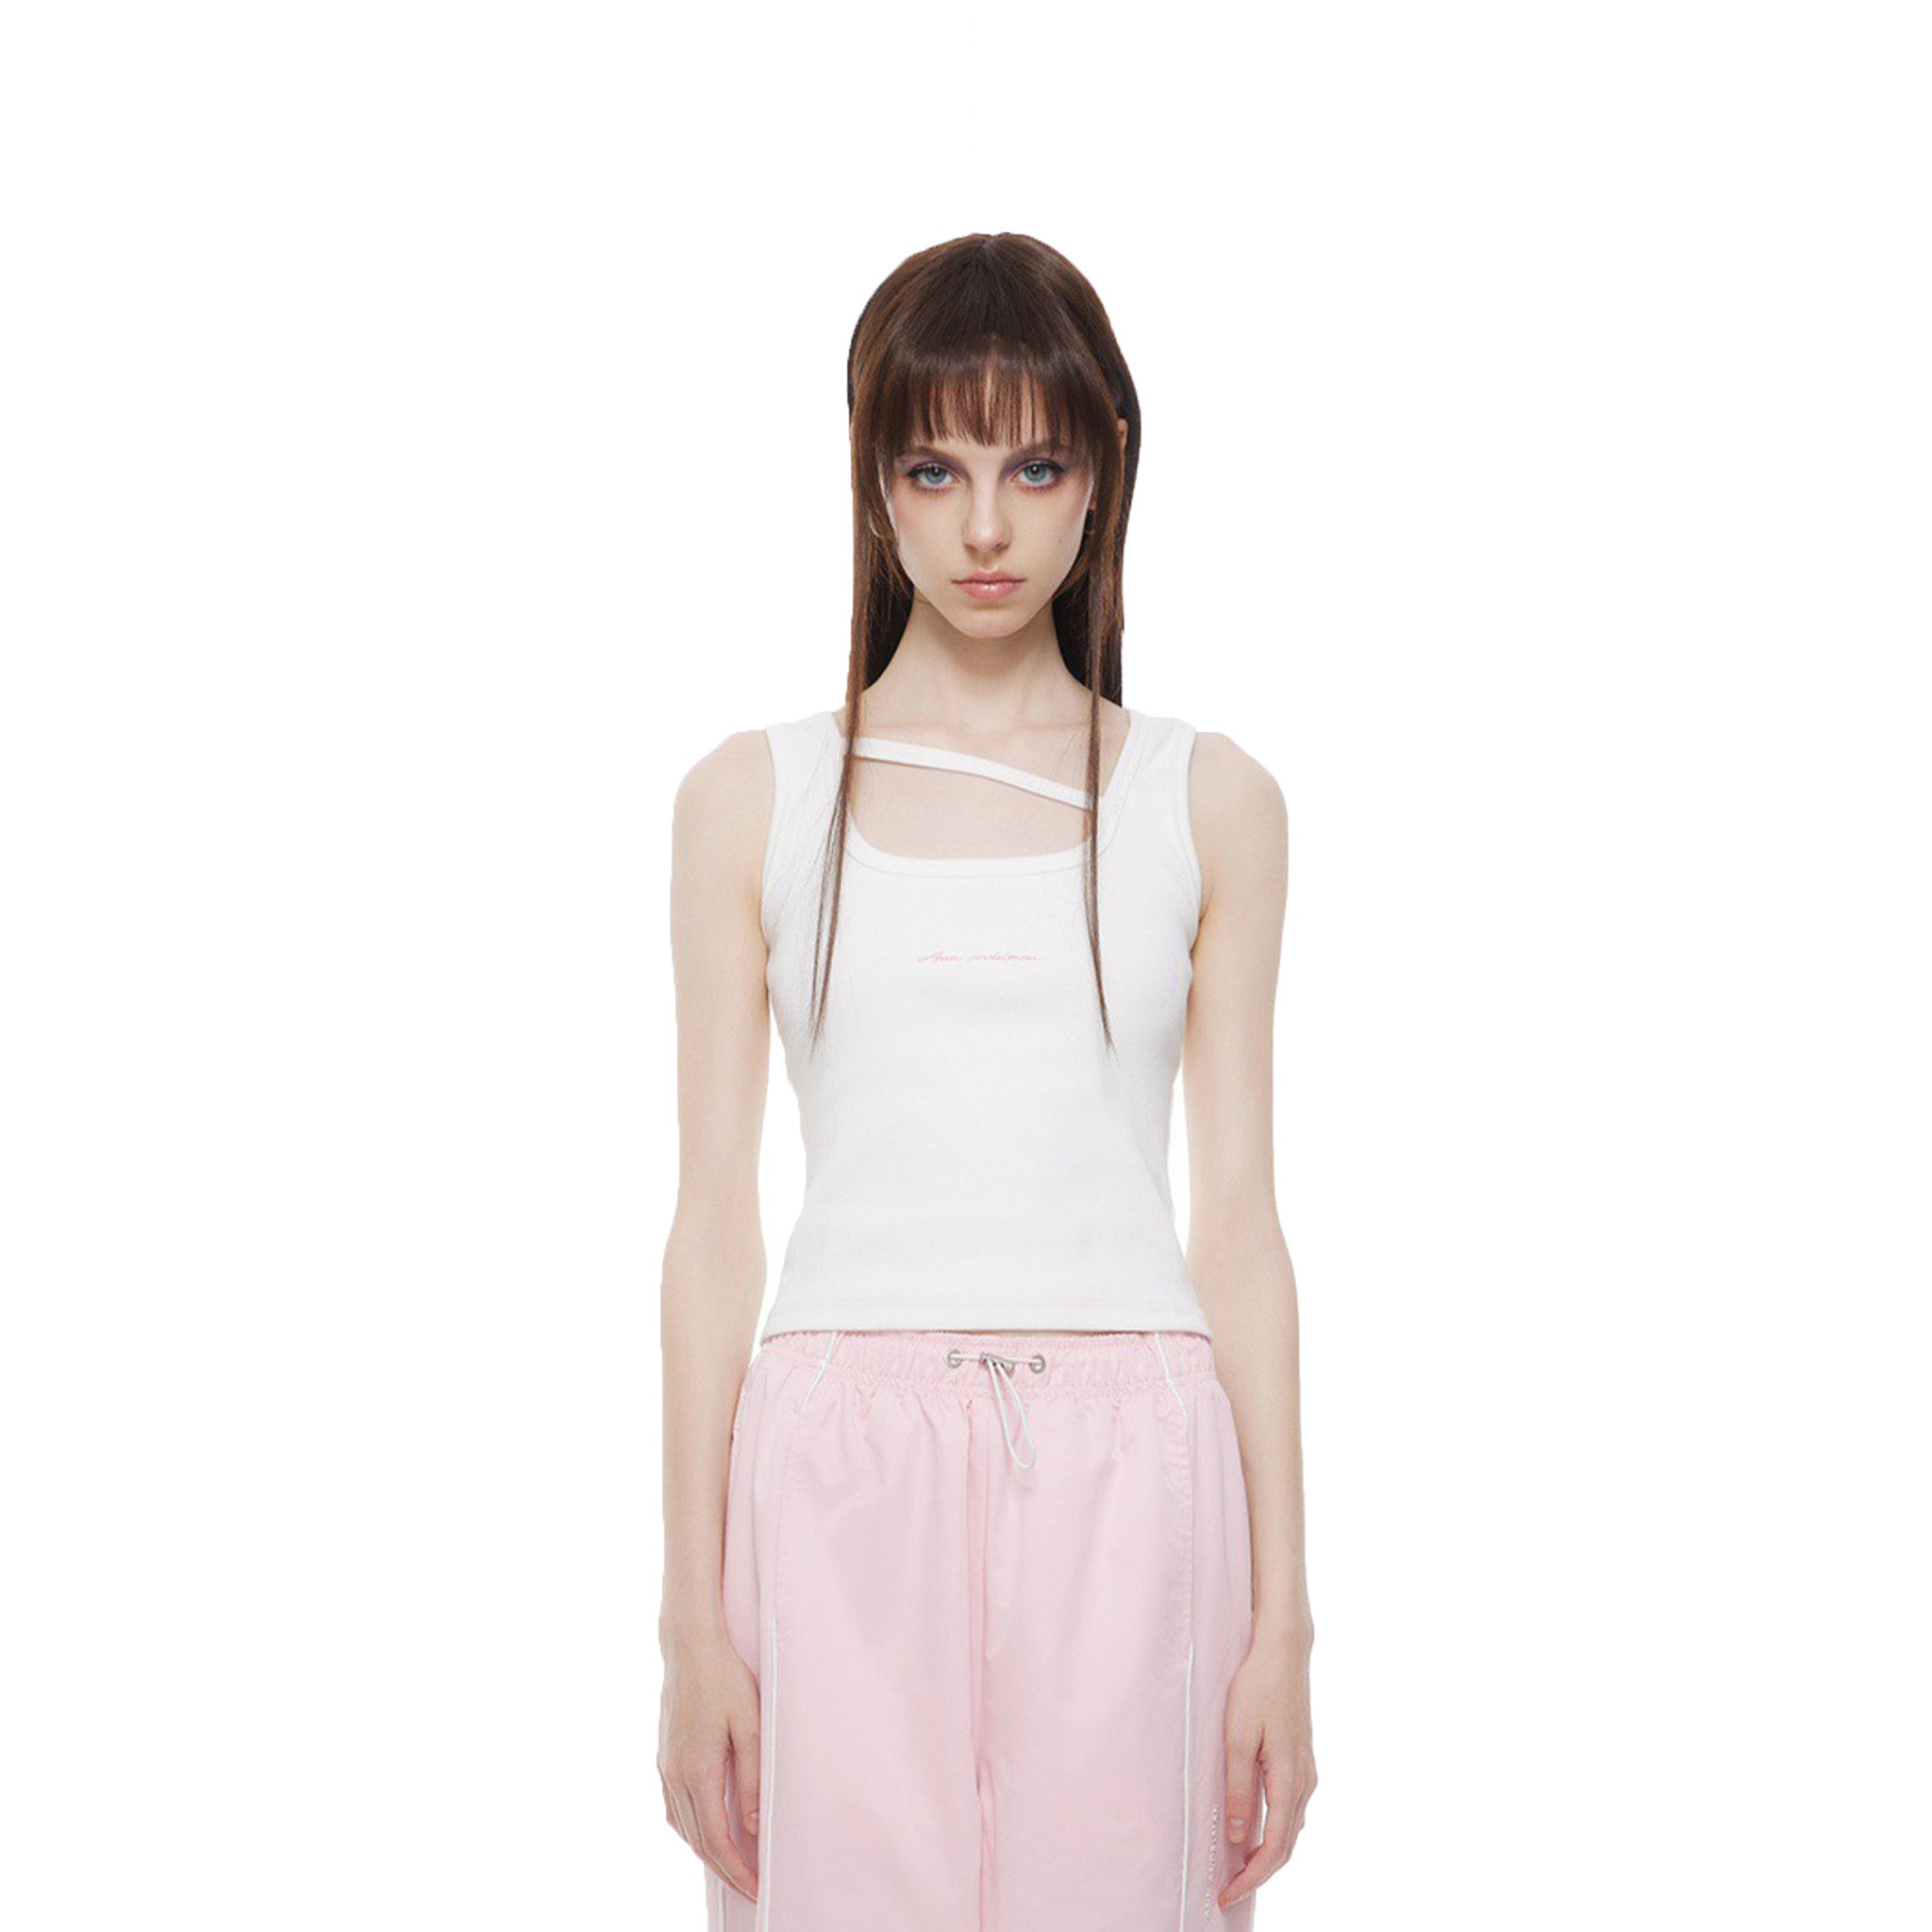 ANN ANDELMAN White 520 Limited Tank Top | MADA IN CHINA